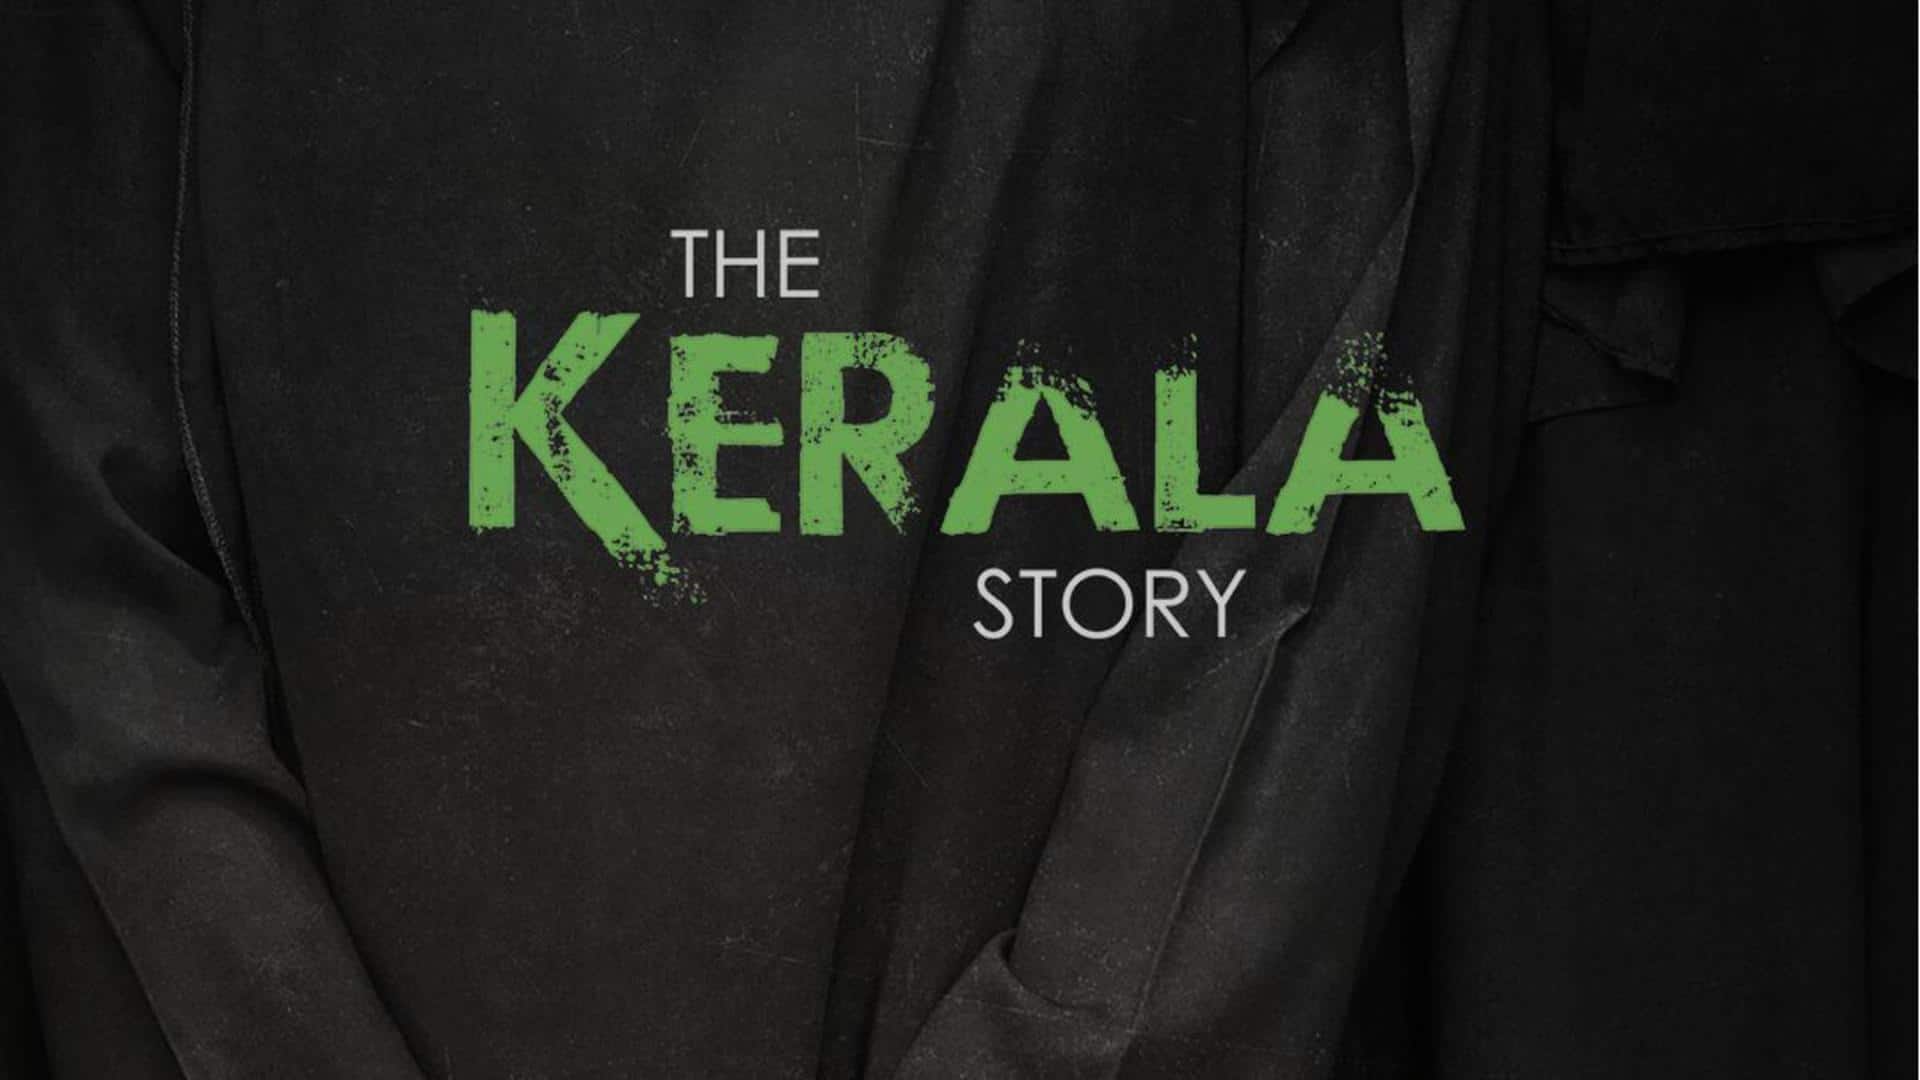 Box office: Despite controversies, 'The Kerala Story' witnesses huge jump